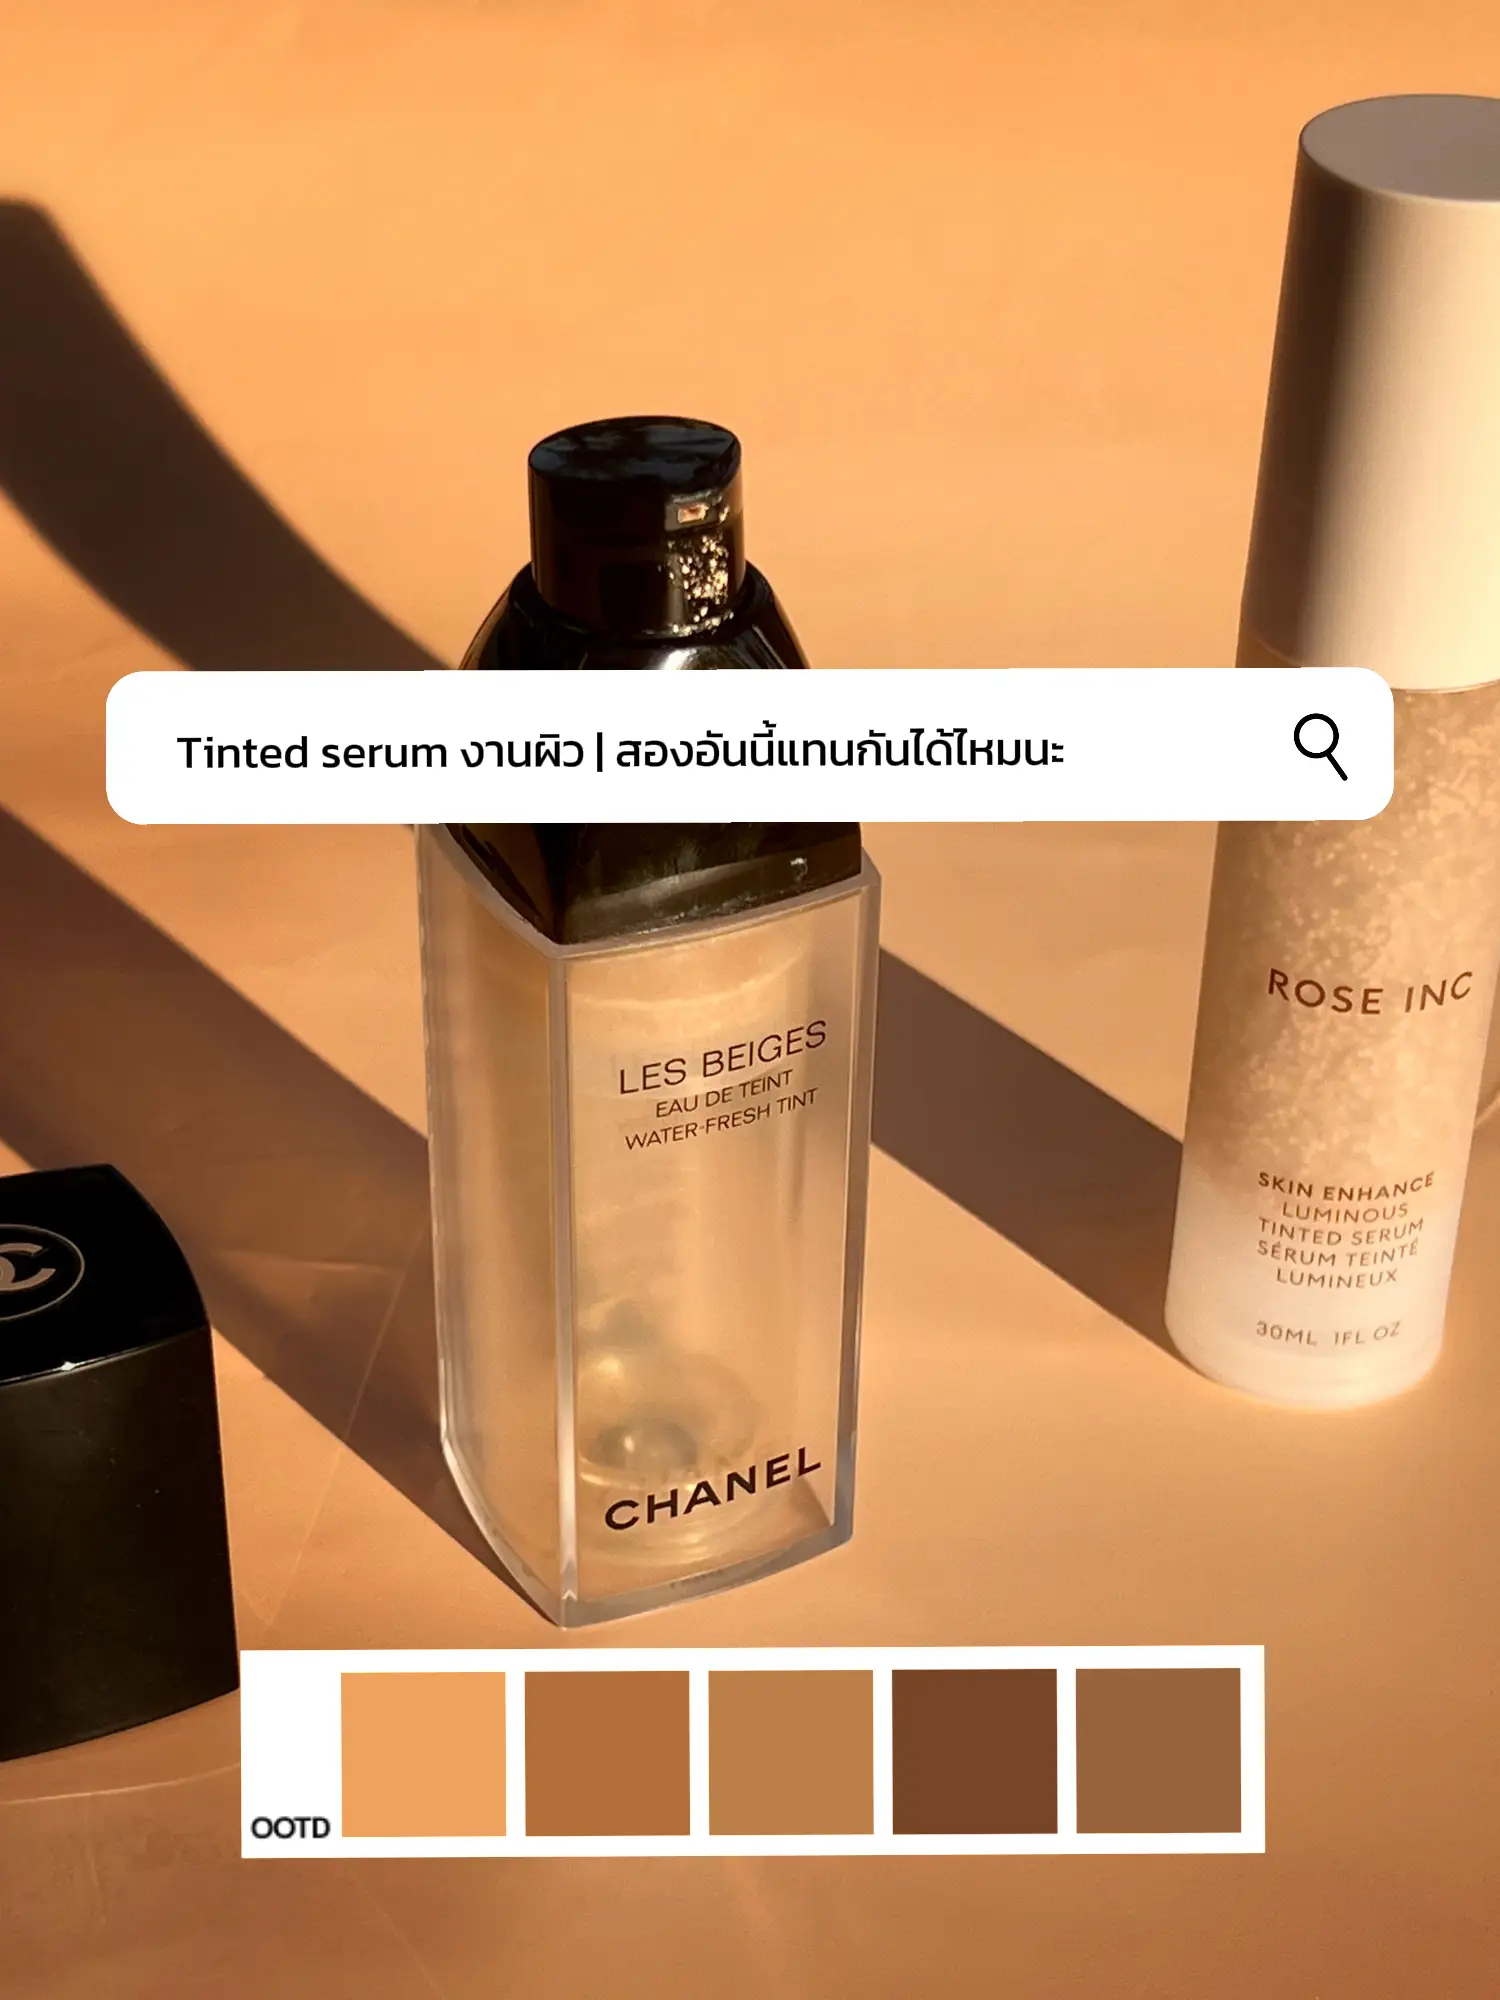 ROSE INC tinted serum vs CHANEL แทนกันได้ปะเนี่ย?, Video published by  Amakeupcollecto